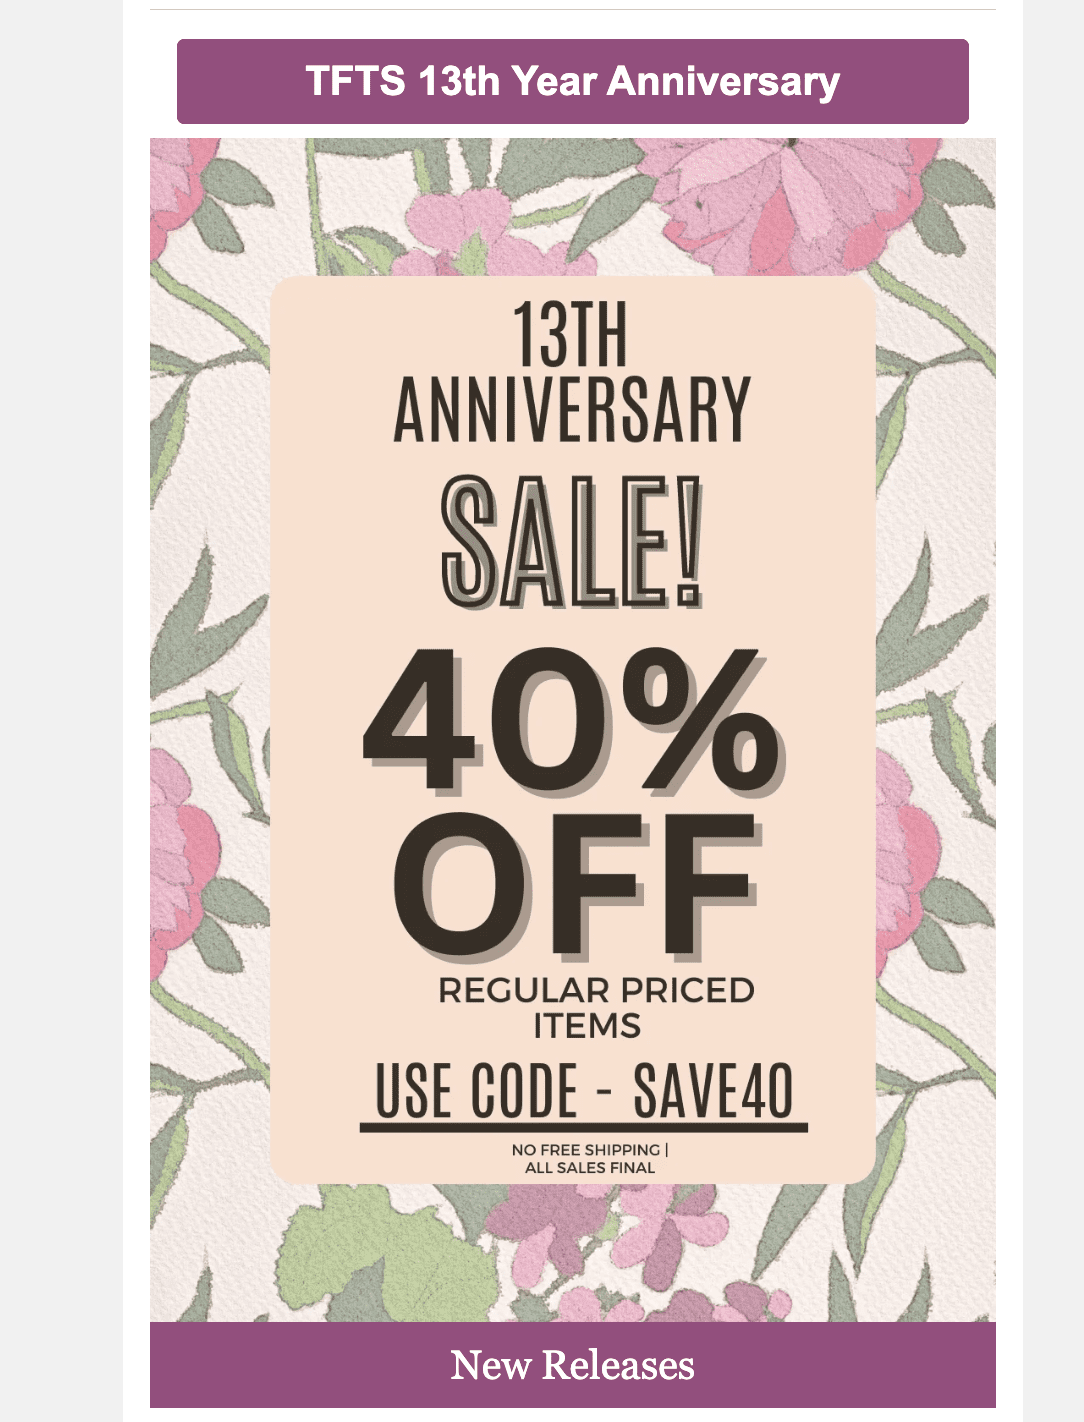 Anniversary email examples to build customer relationships